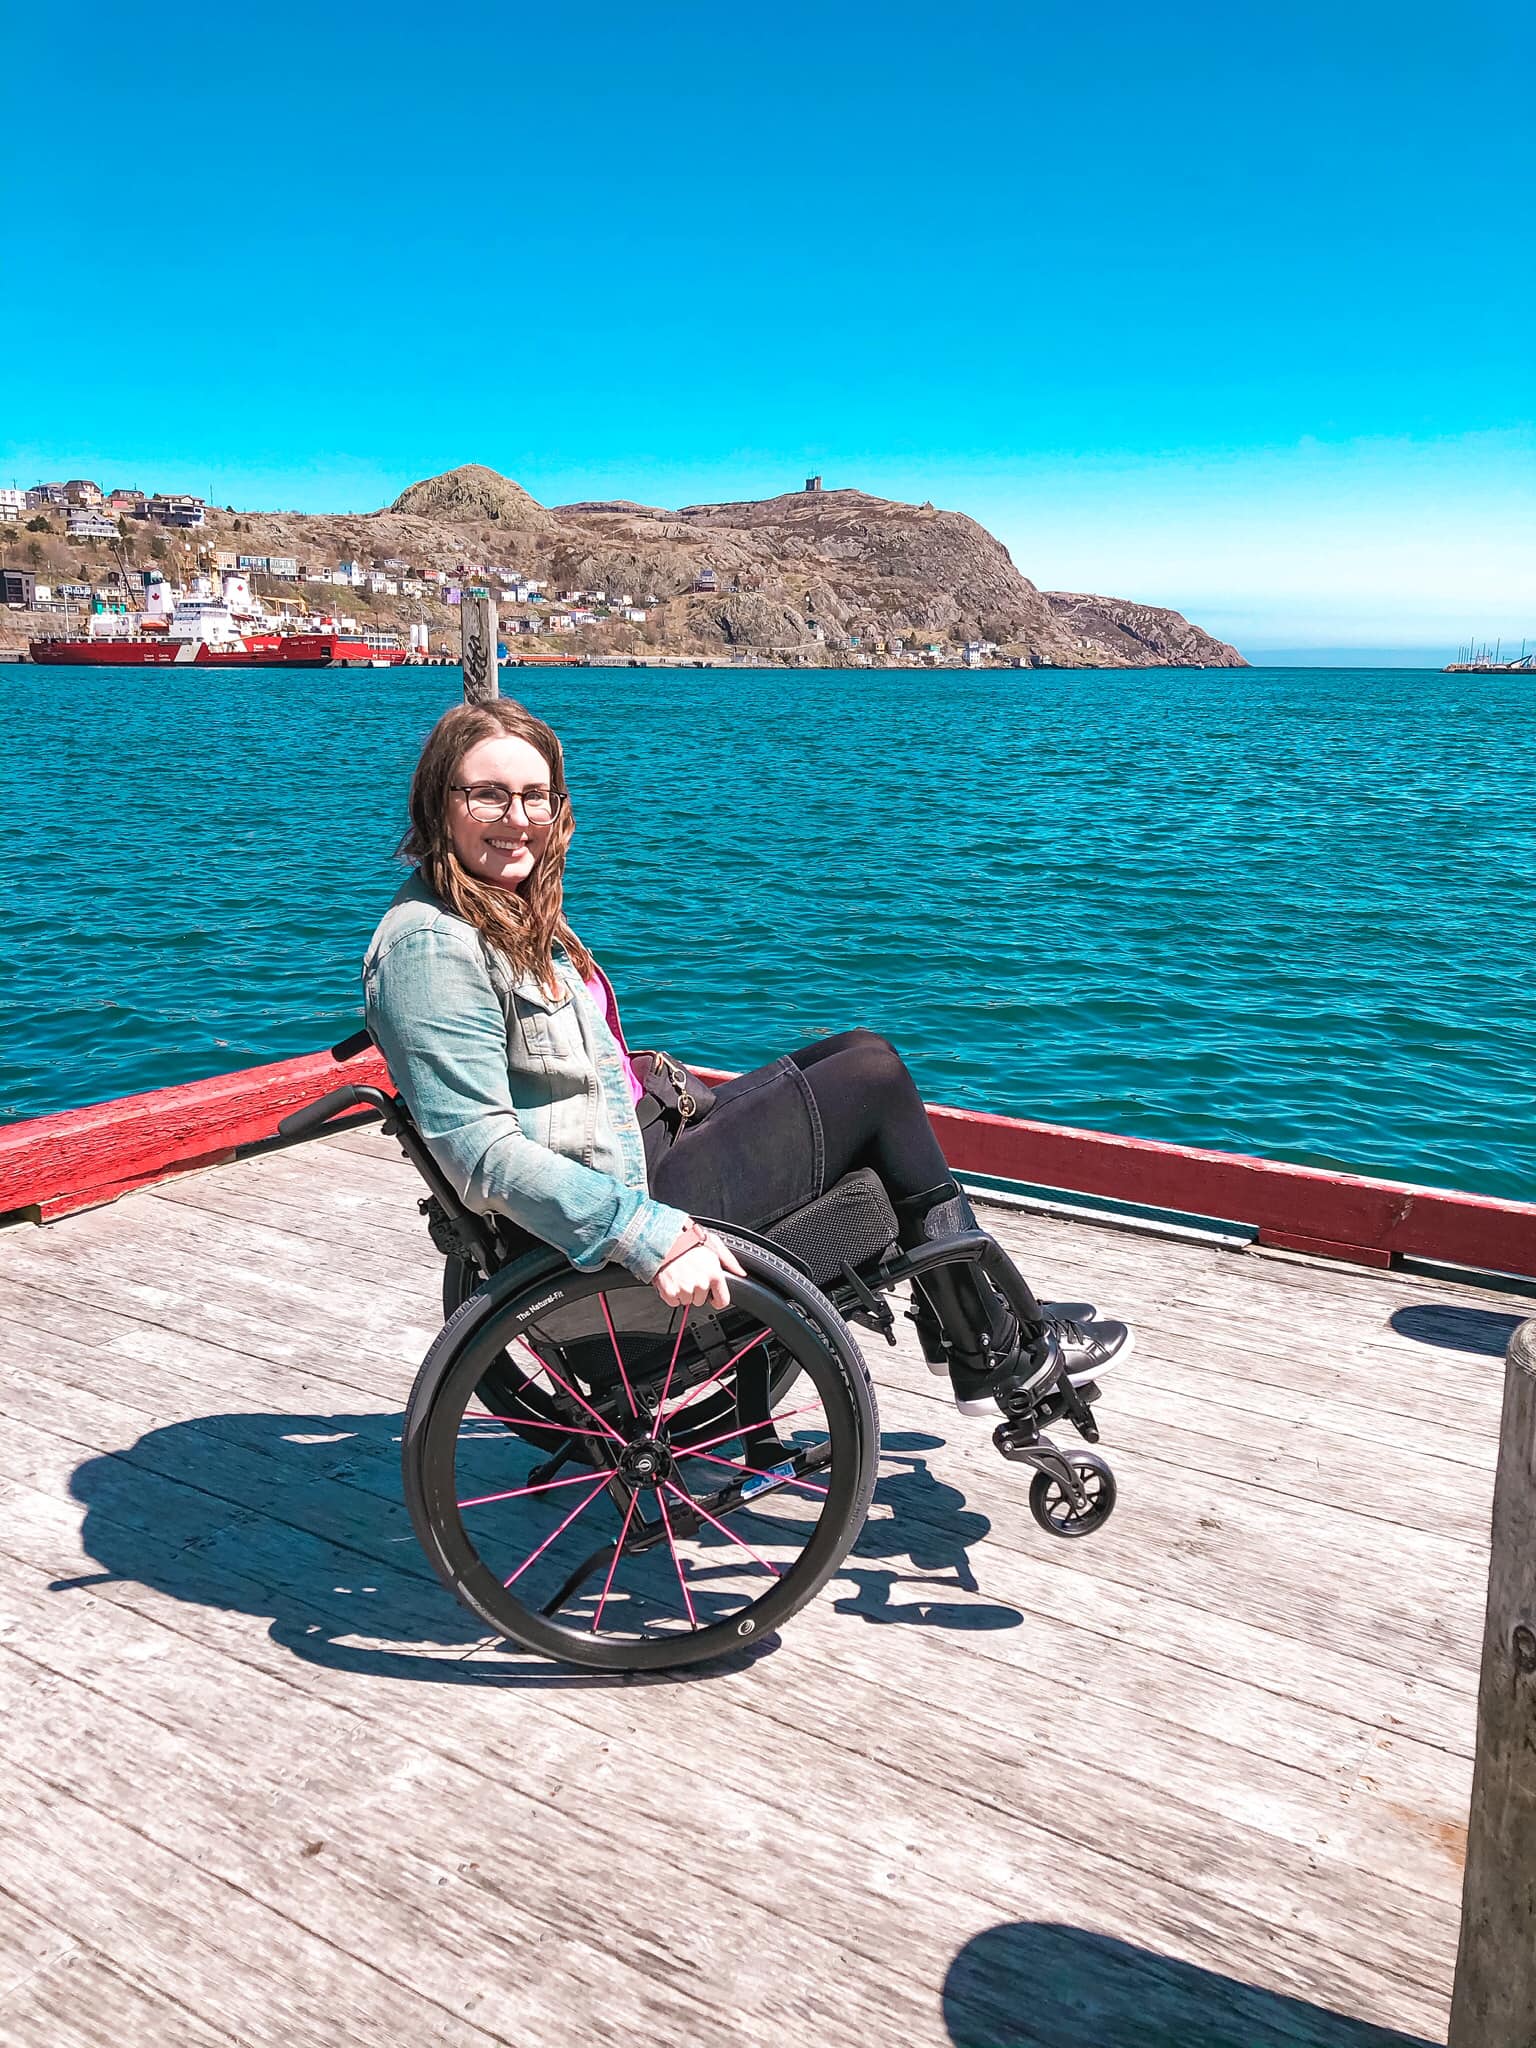 A photo of me doing a wheelie in my wheelchair on the wharf at Harbourside Park. Behind me is the St. John’s Harbour, Signal Hill and the Battery in the distance, and blue sky above.